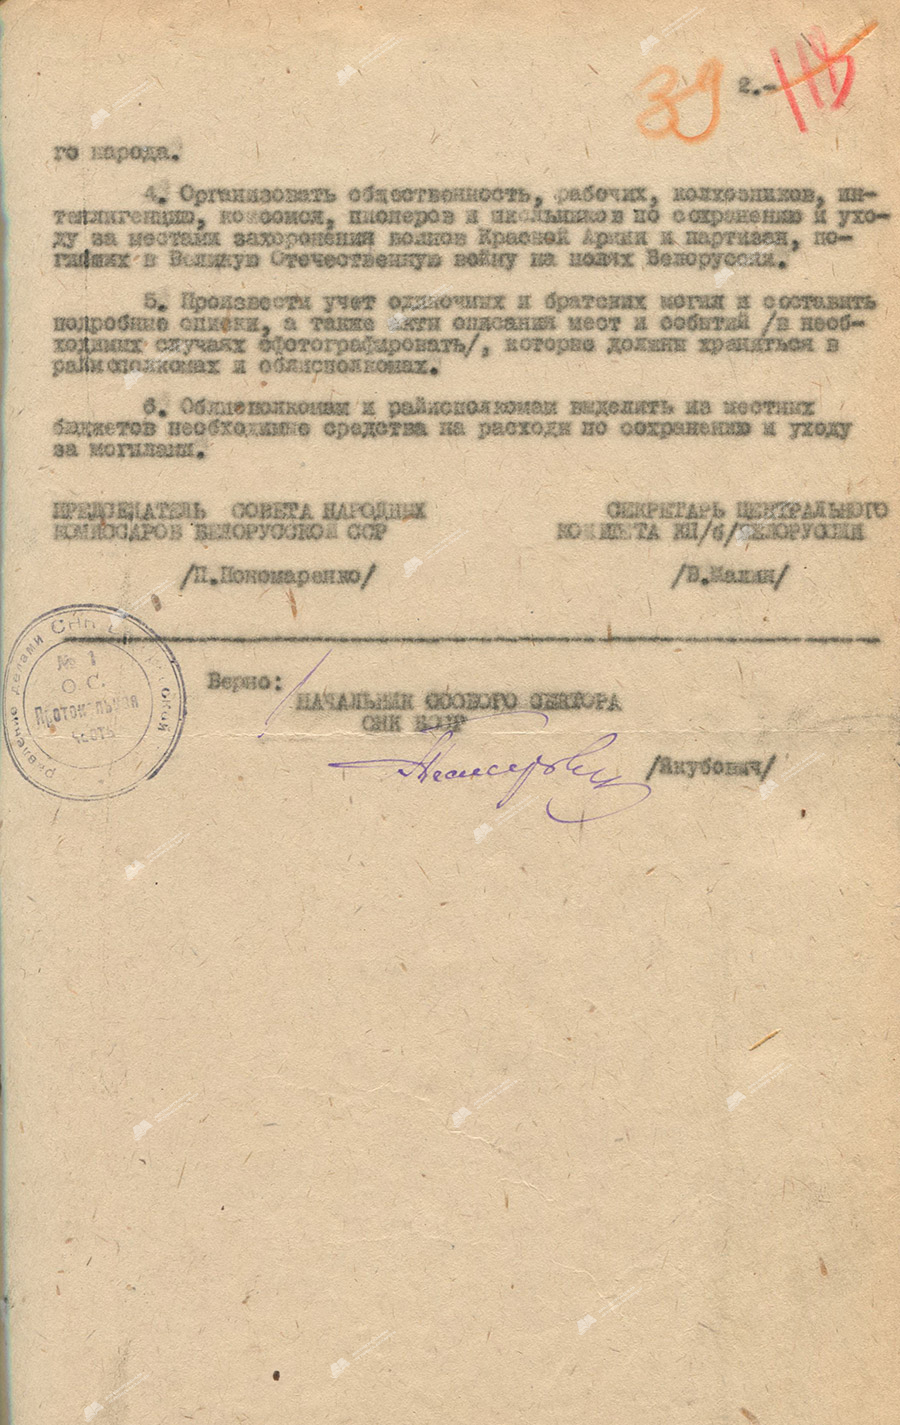 Resolution of the Council of People's Commissars of the BSSR and the Central Committee of the Communist Party (Bolsheviks) of Belarus «On the preservation and care of the burial sites of Red Army soldiers and partisans who died in the Great Patriotic War and were buried on the territory of the BSSR»-стр. 1